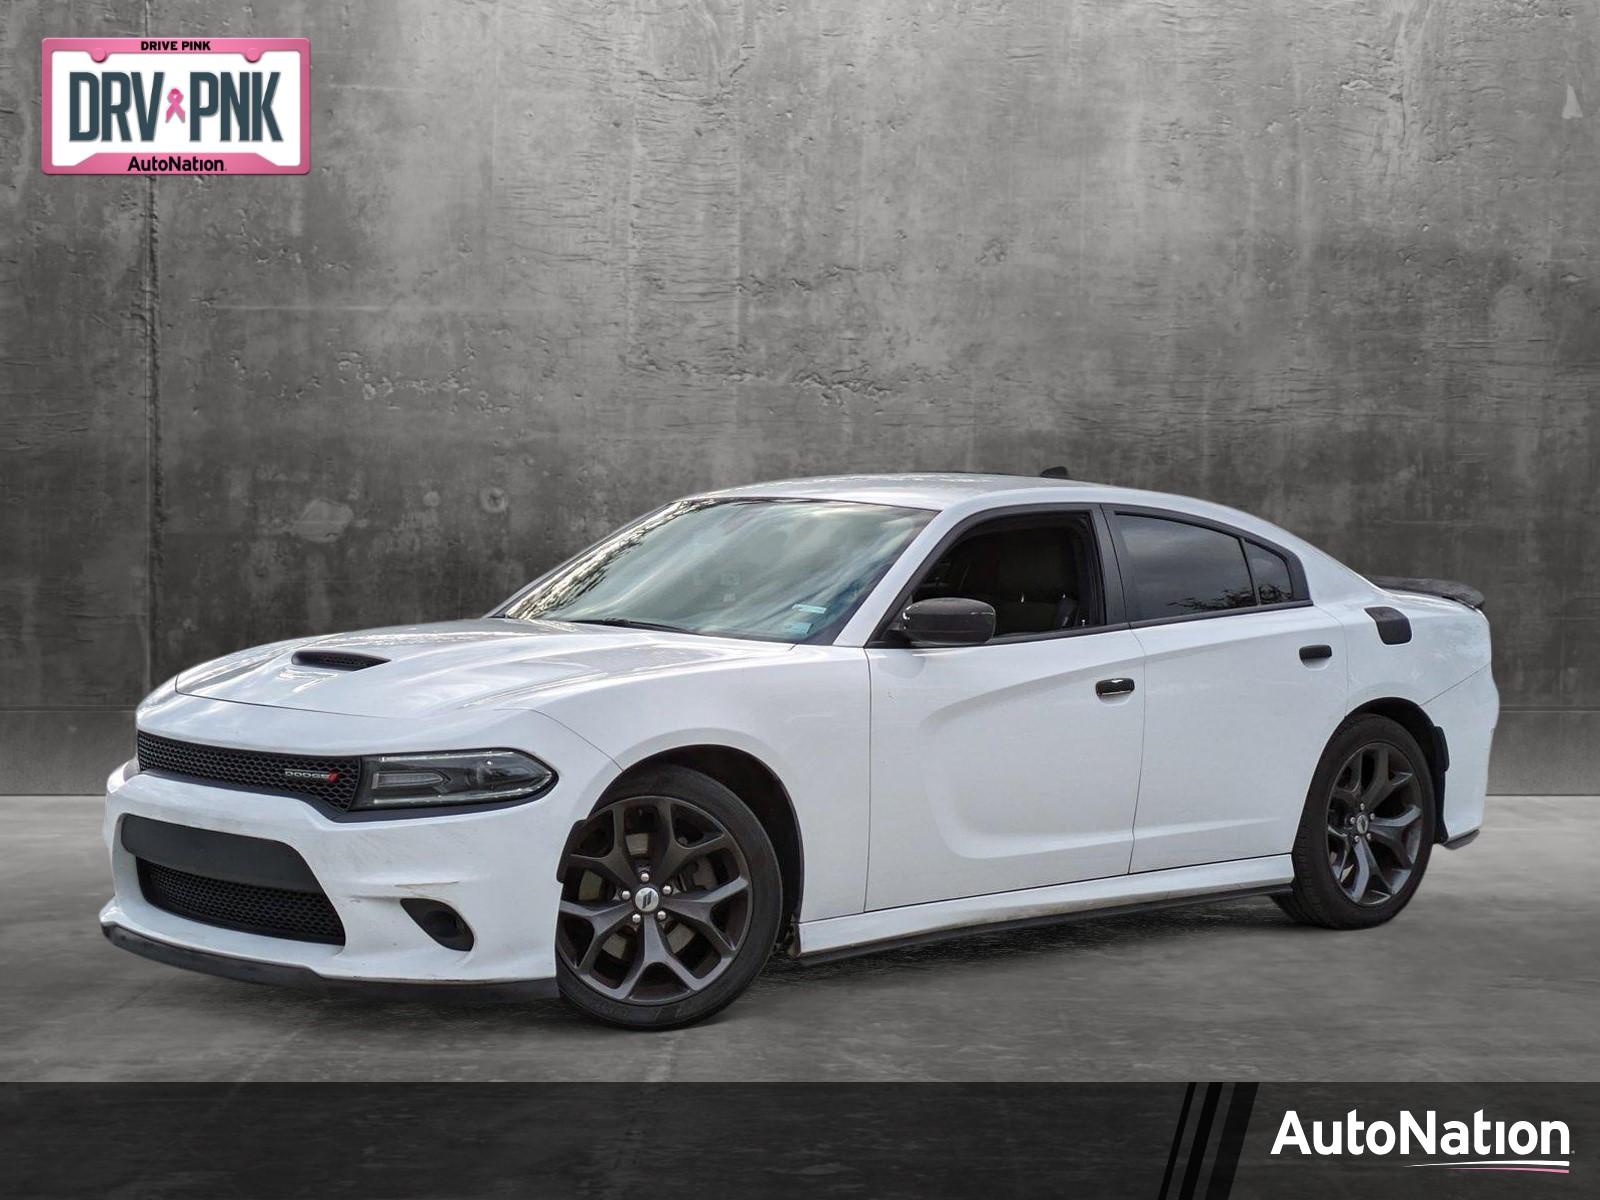 2019 Dodge Charger Vehicle Photo in Coconut Creek, FL 33073